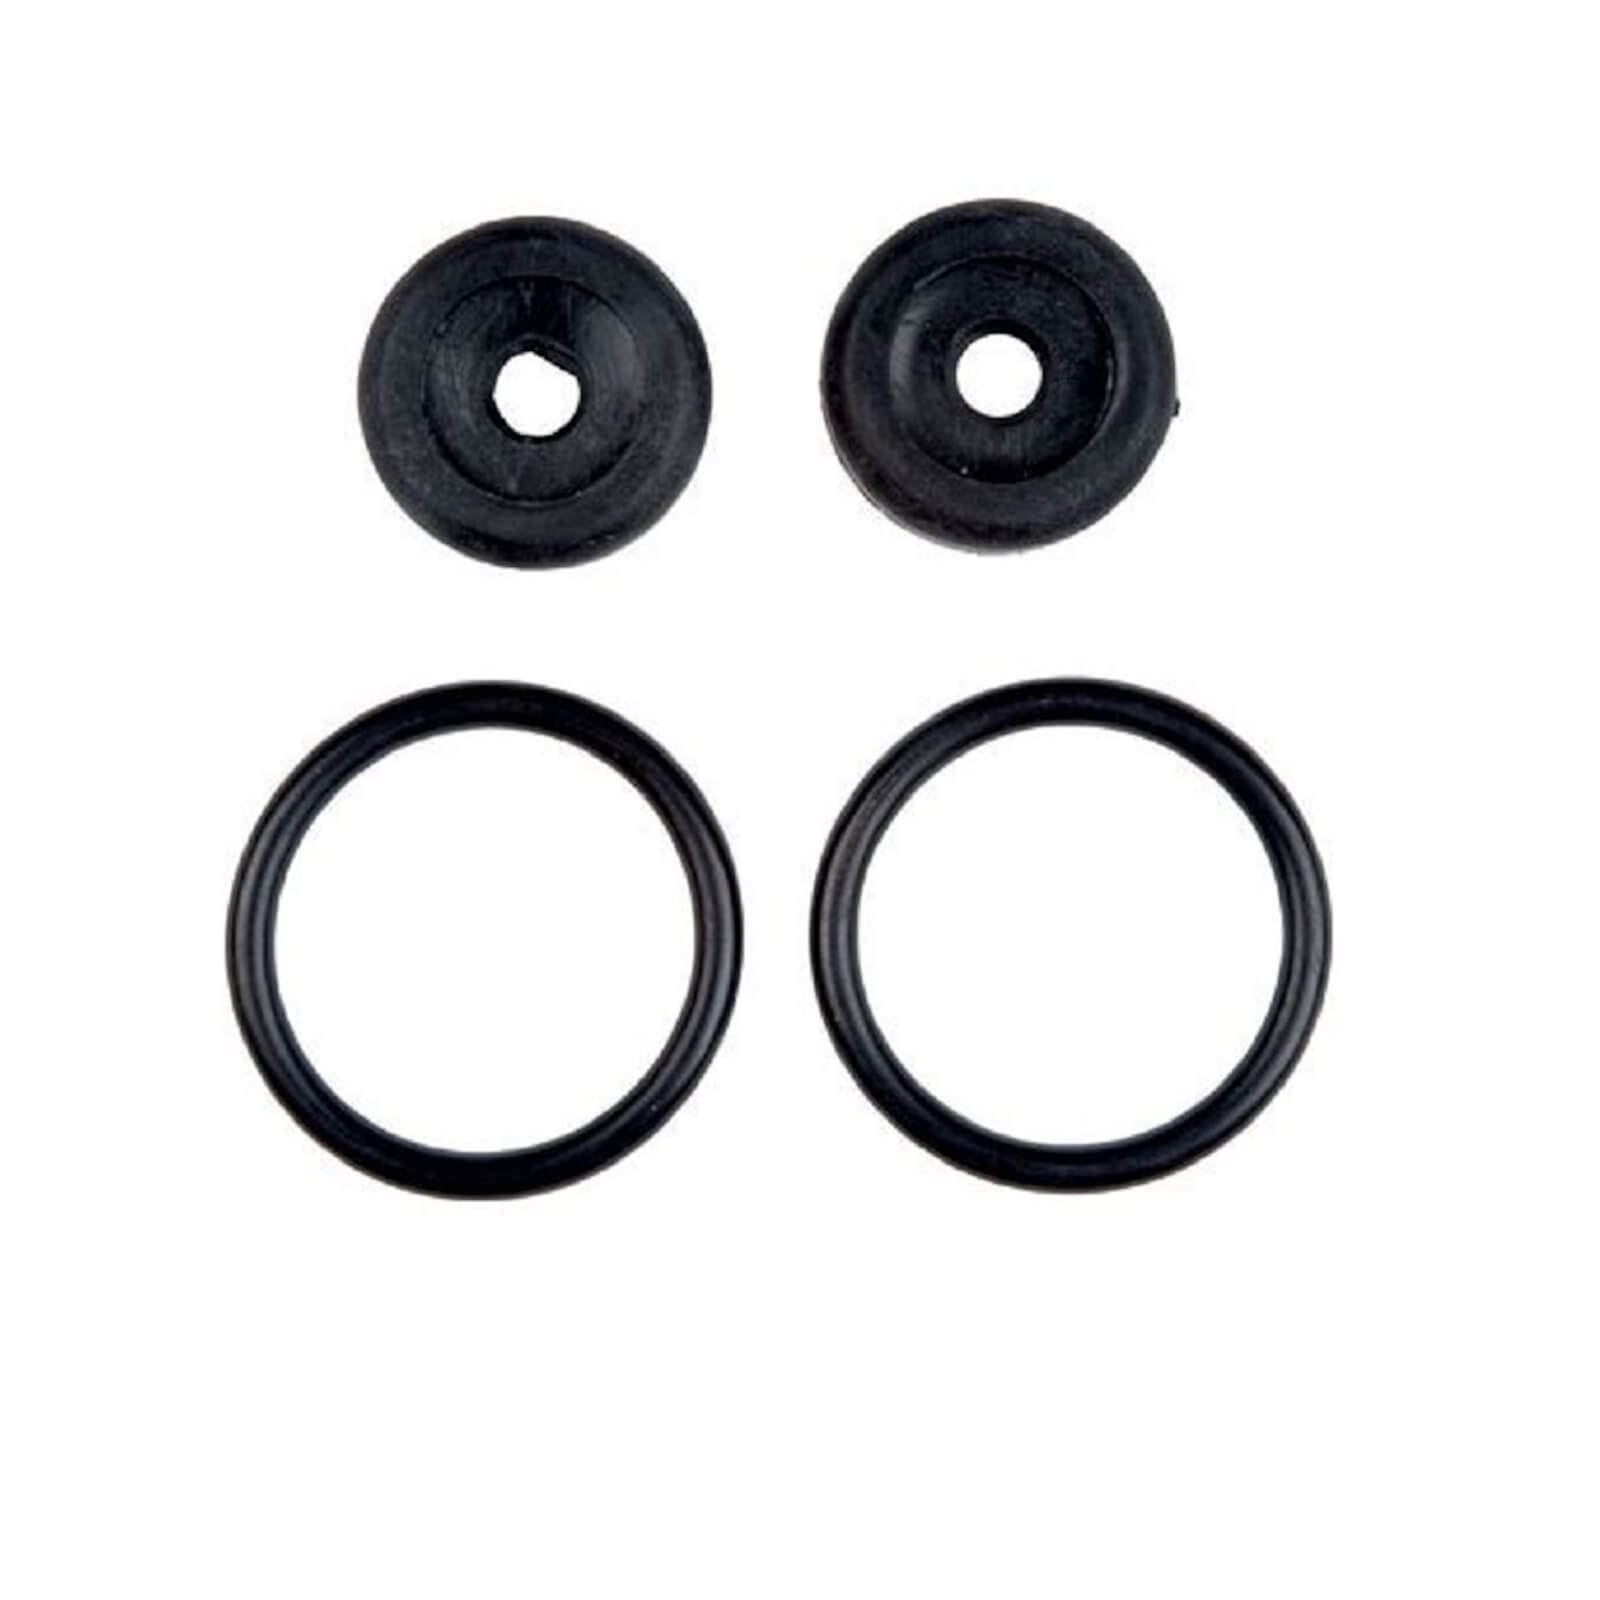 Photo of Delta Tap Washers - 19mm - 2 Pack